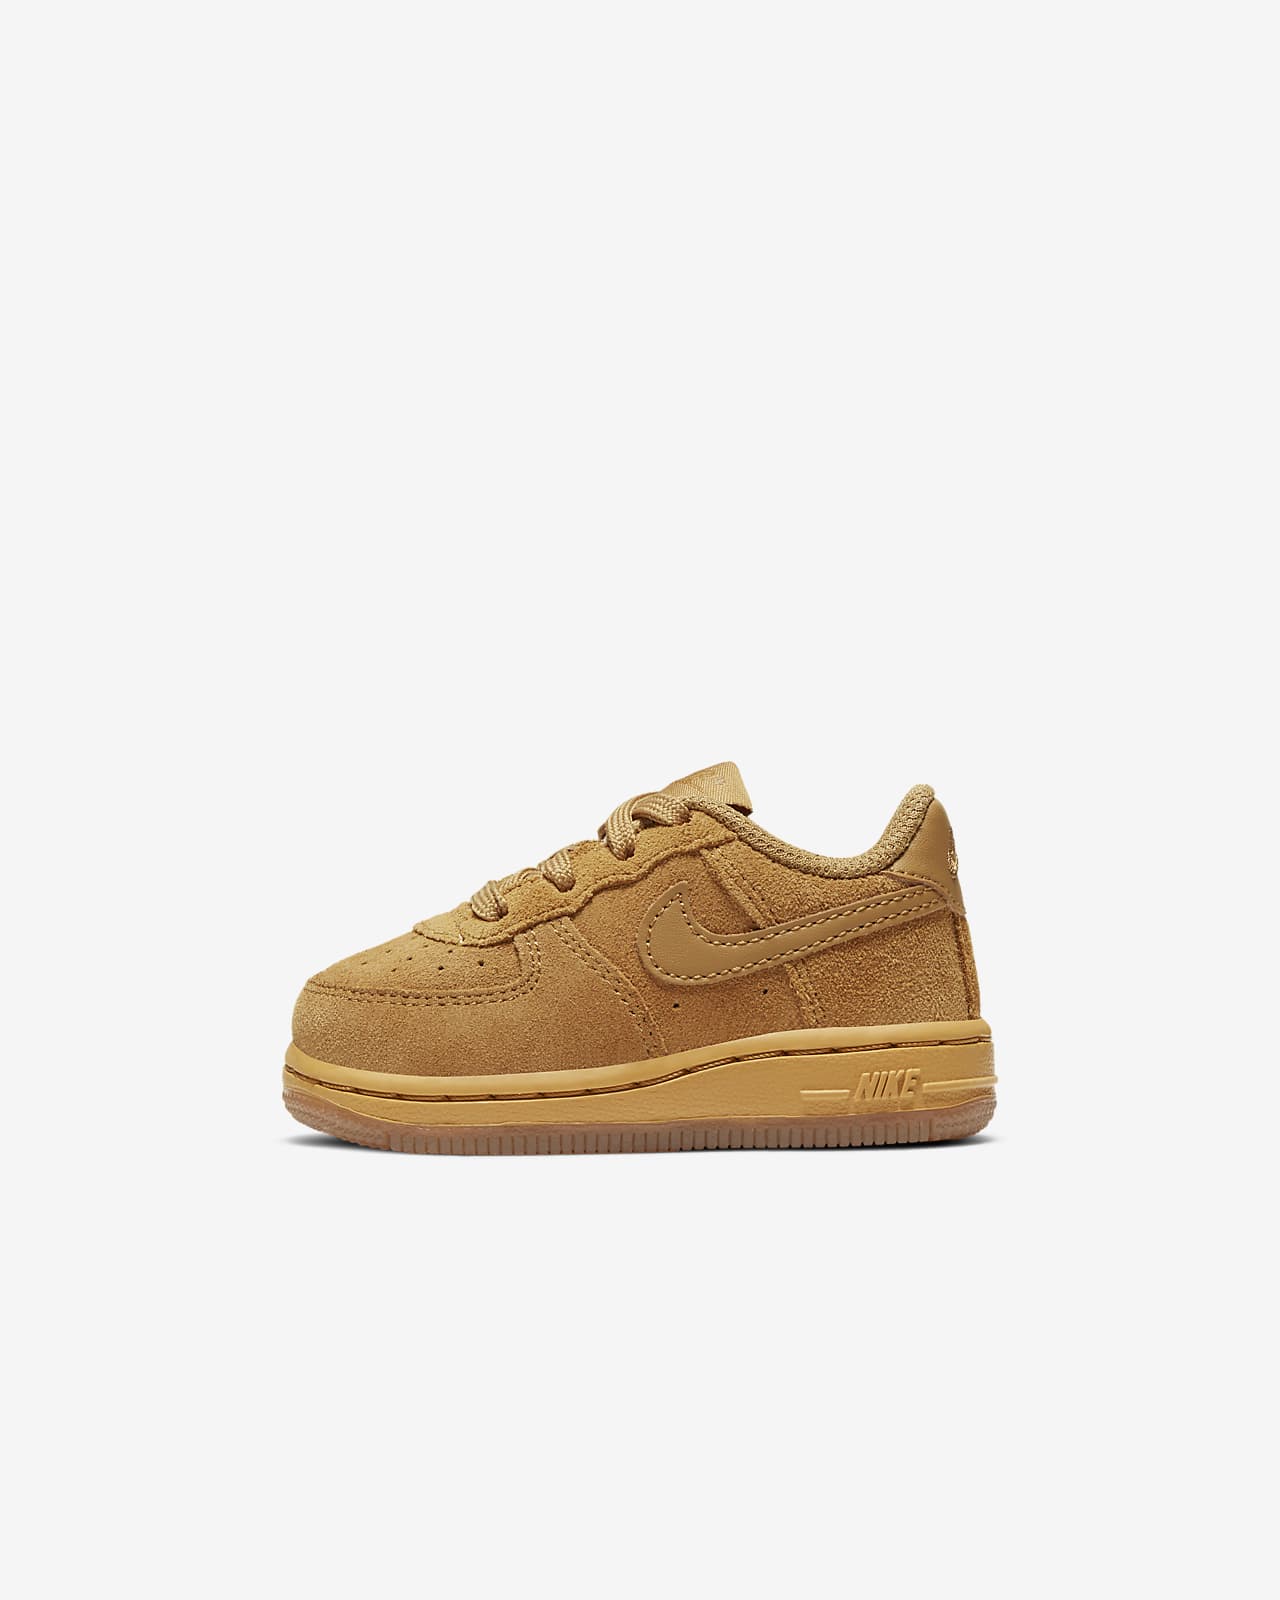 nike wheat forces